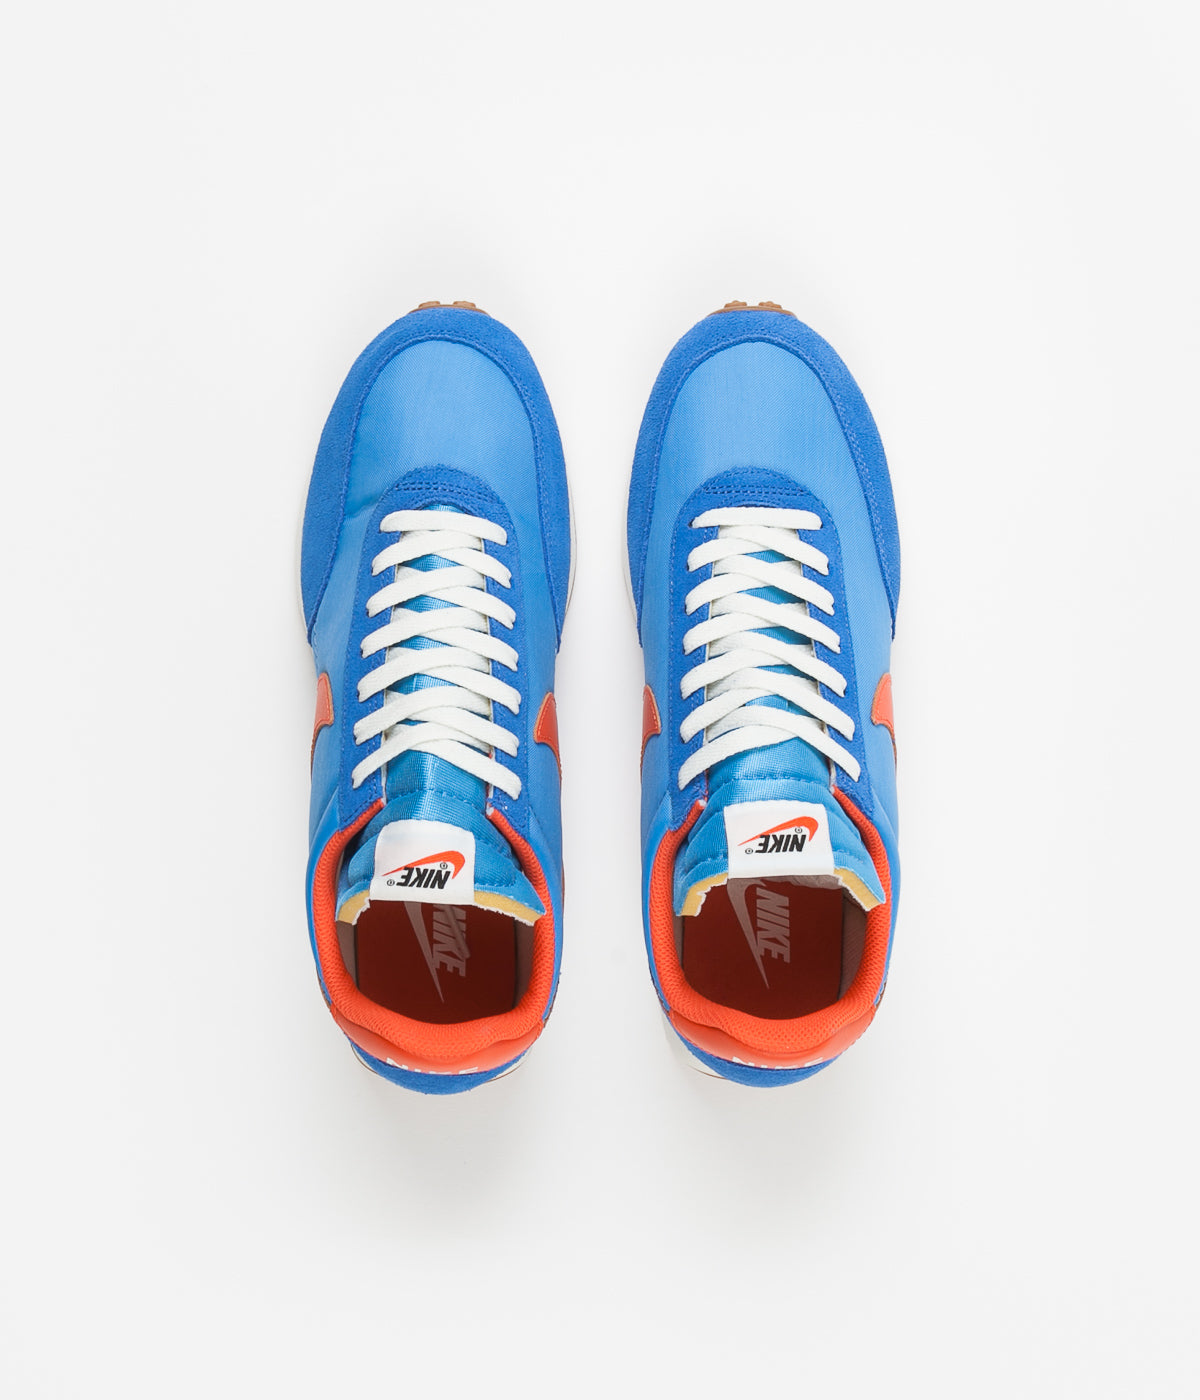 Nike Air Tailwind 79 Shoes - Pacific 